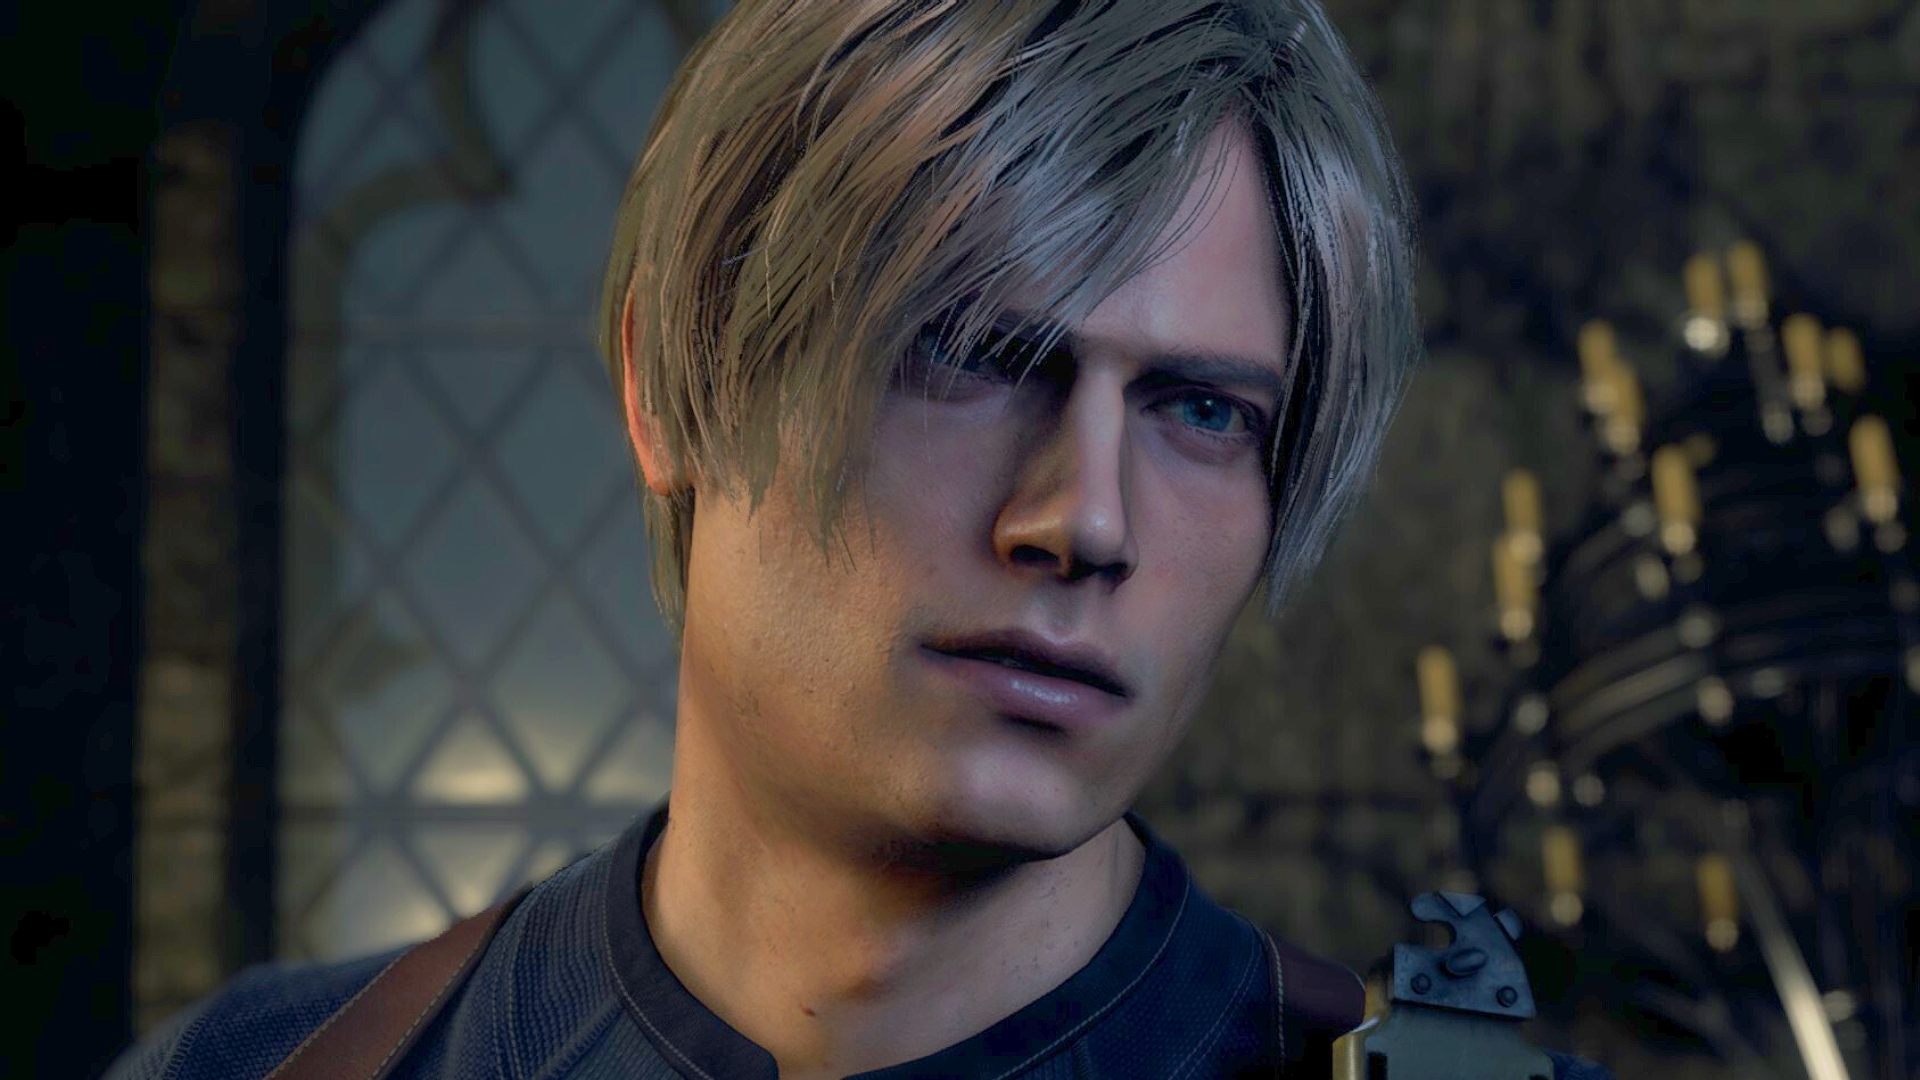 Resident Evil 4 wallpapers for desktop, download free Resident Evil 4  pictures and backgrounds for PC